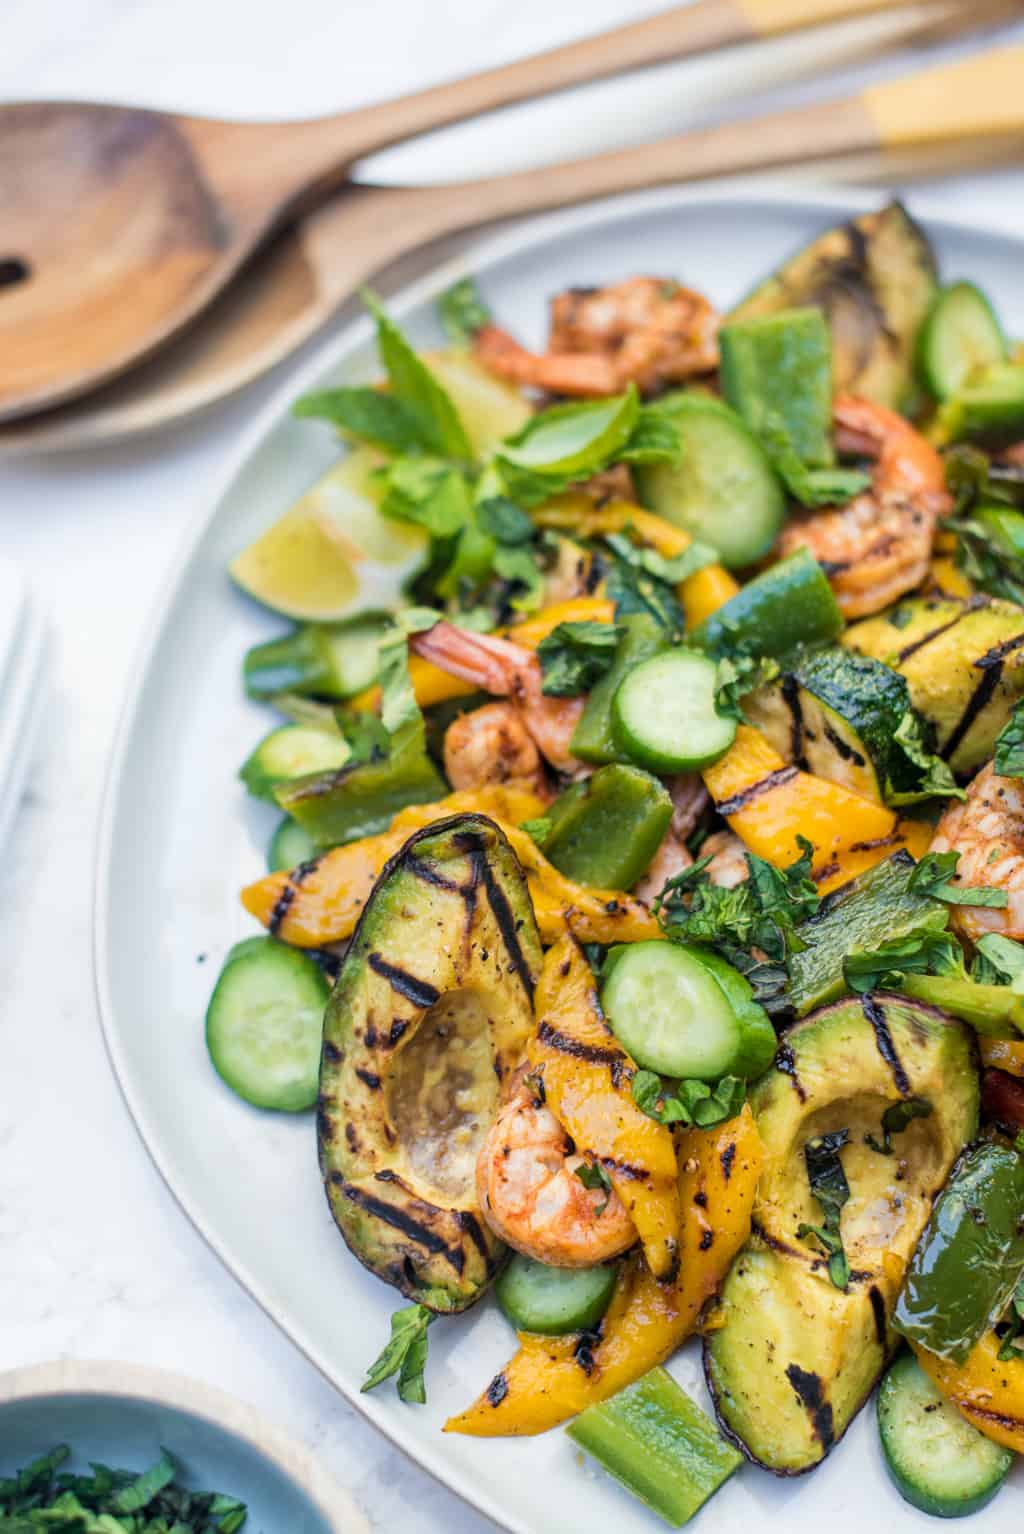 Zucchini Grilled Shrimps Recipe Avocado Salad Dressing Selber Makes Easy